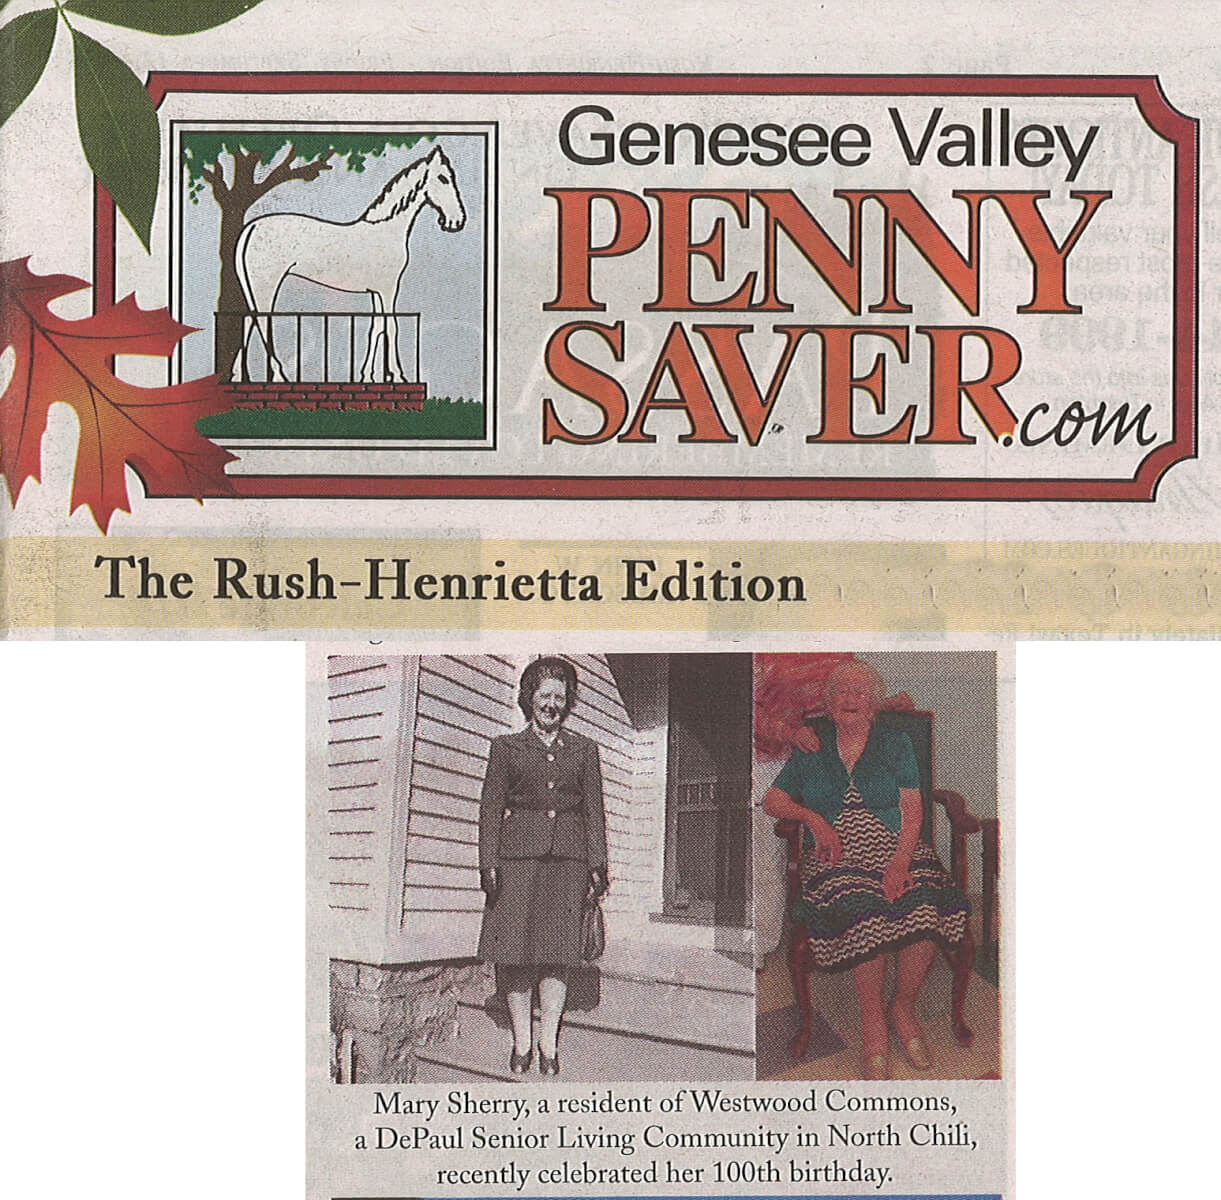 Westwood Common's resident Mary Sherry turns 100 photo in the Genesee Valley Penny Saver September 17, 2014